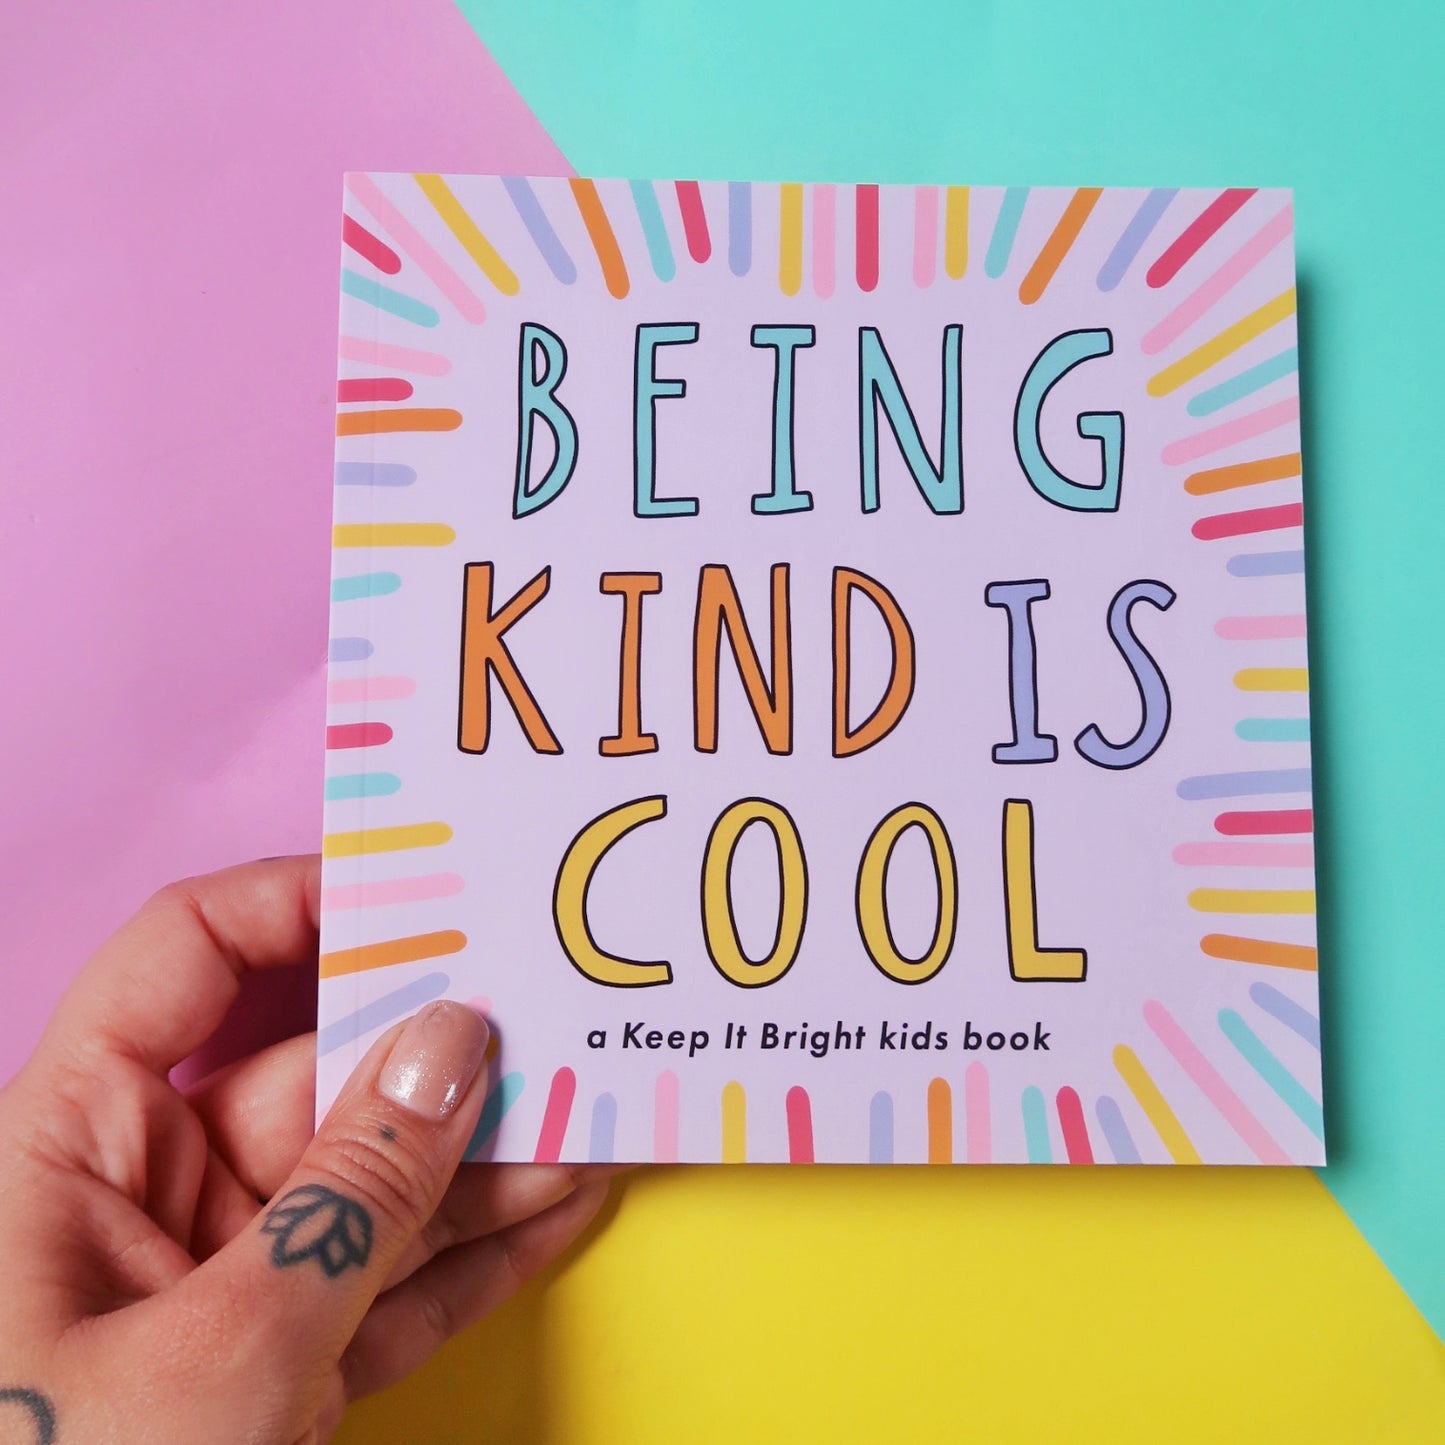 Being Kind Is Cool - a keep it bright kids book about kindness front cover 